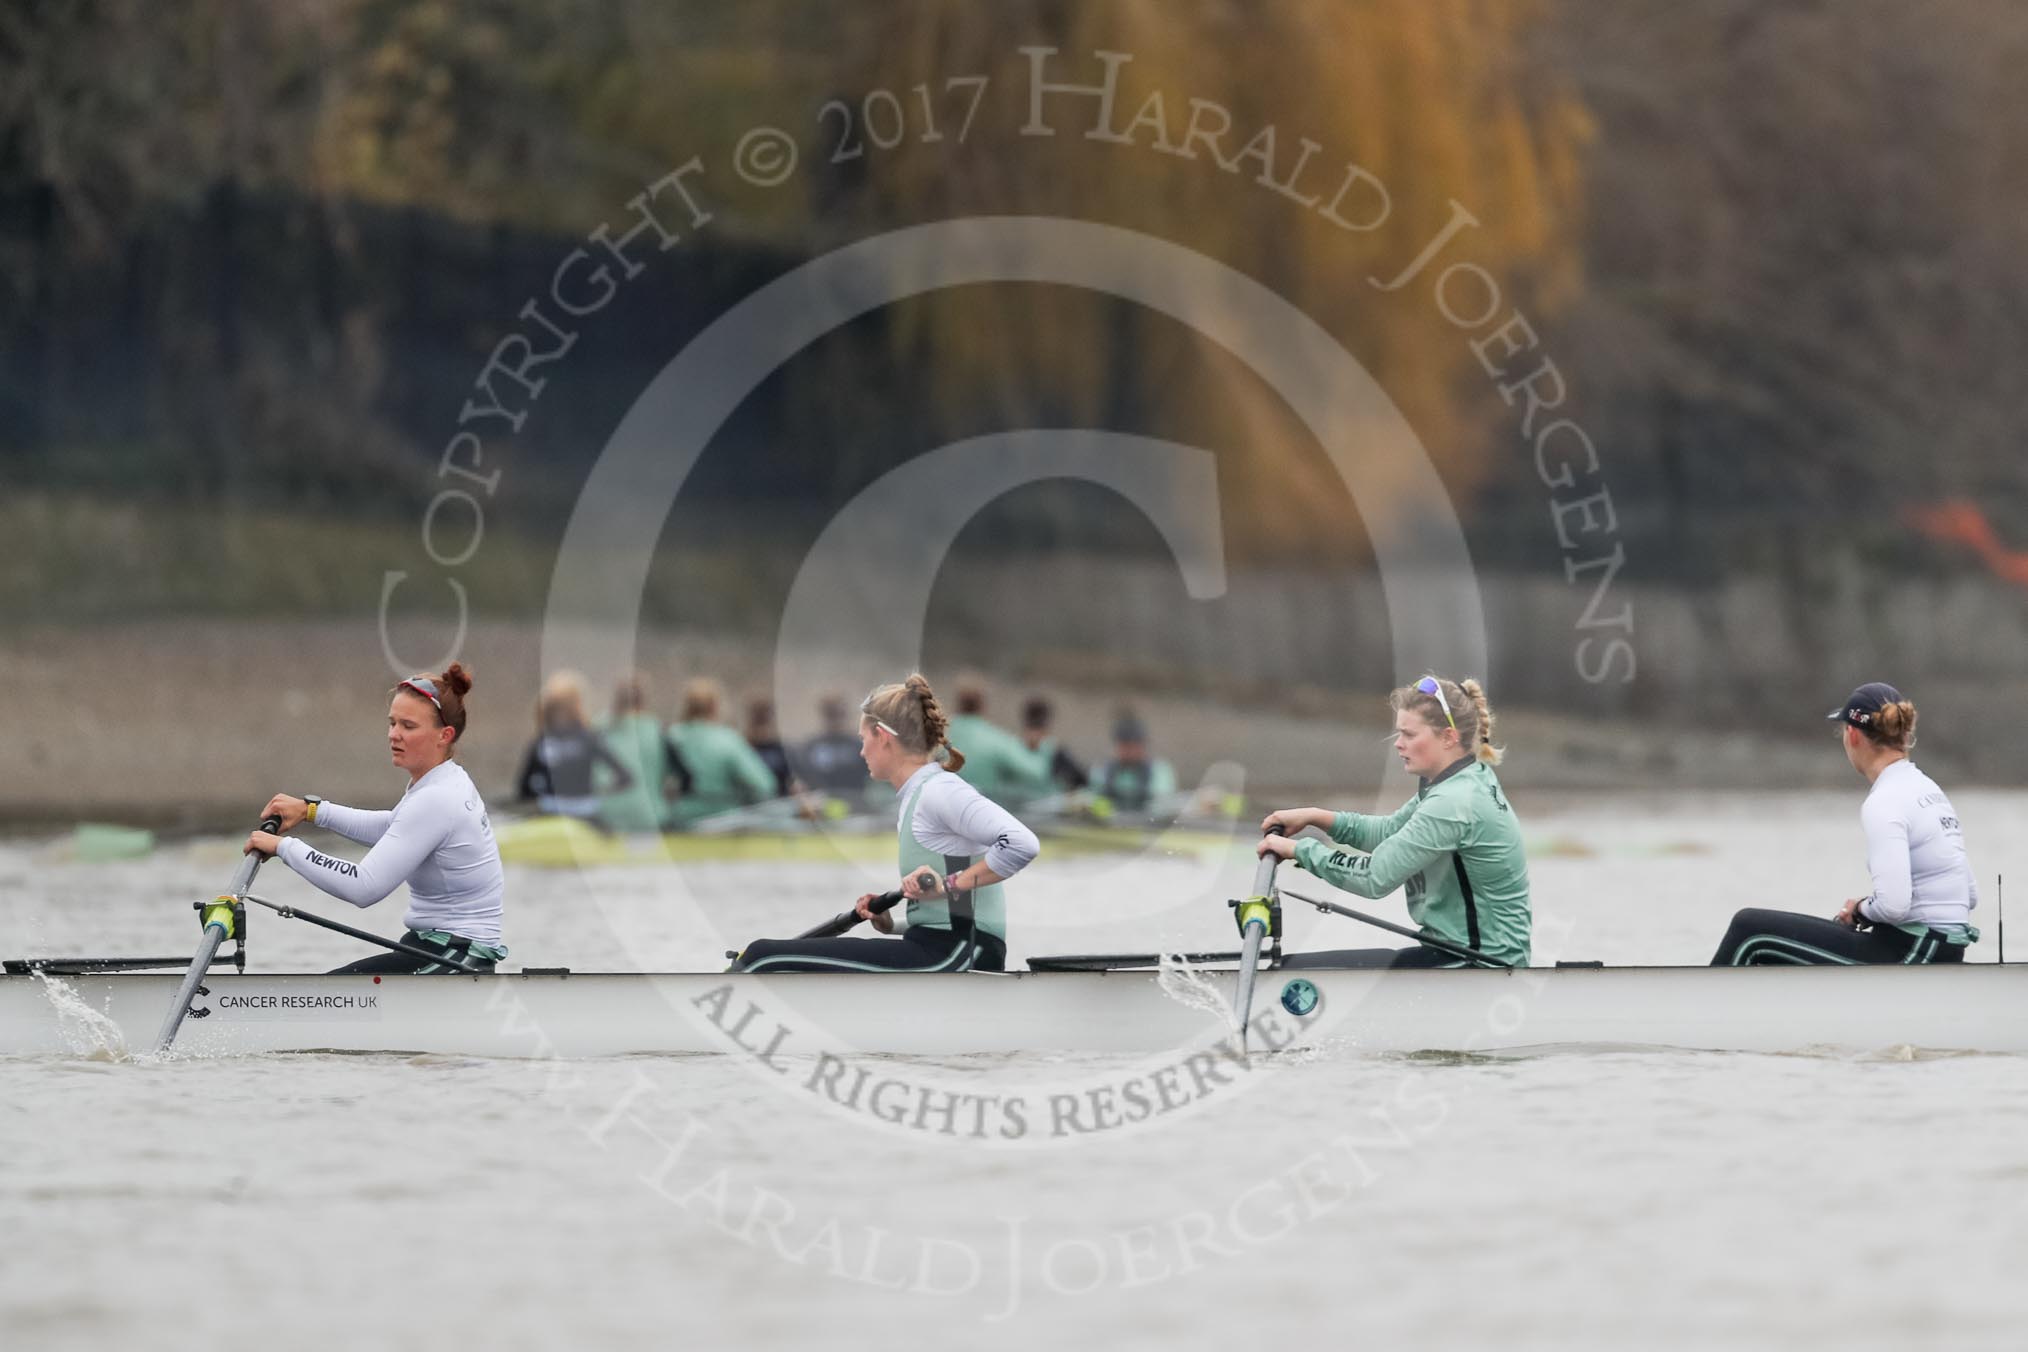 The Boat Race season 2018 - Women's Boat Race Trial Eights (CUWBC, Cambridge): Expecto Patronu, here 5 Kelsey Barolak, 4 Laura Foster, 3 Sally O Brien, 2 Millie Perrin.
River Thames between Putney Bridge and Mortlake,
London SW15,

United Kingdom,
on 05 December 2017 at 12:23, image #26